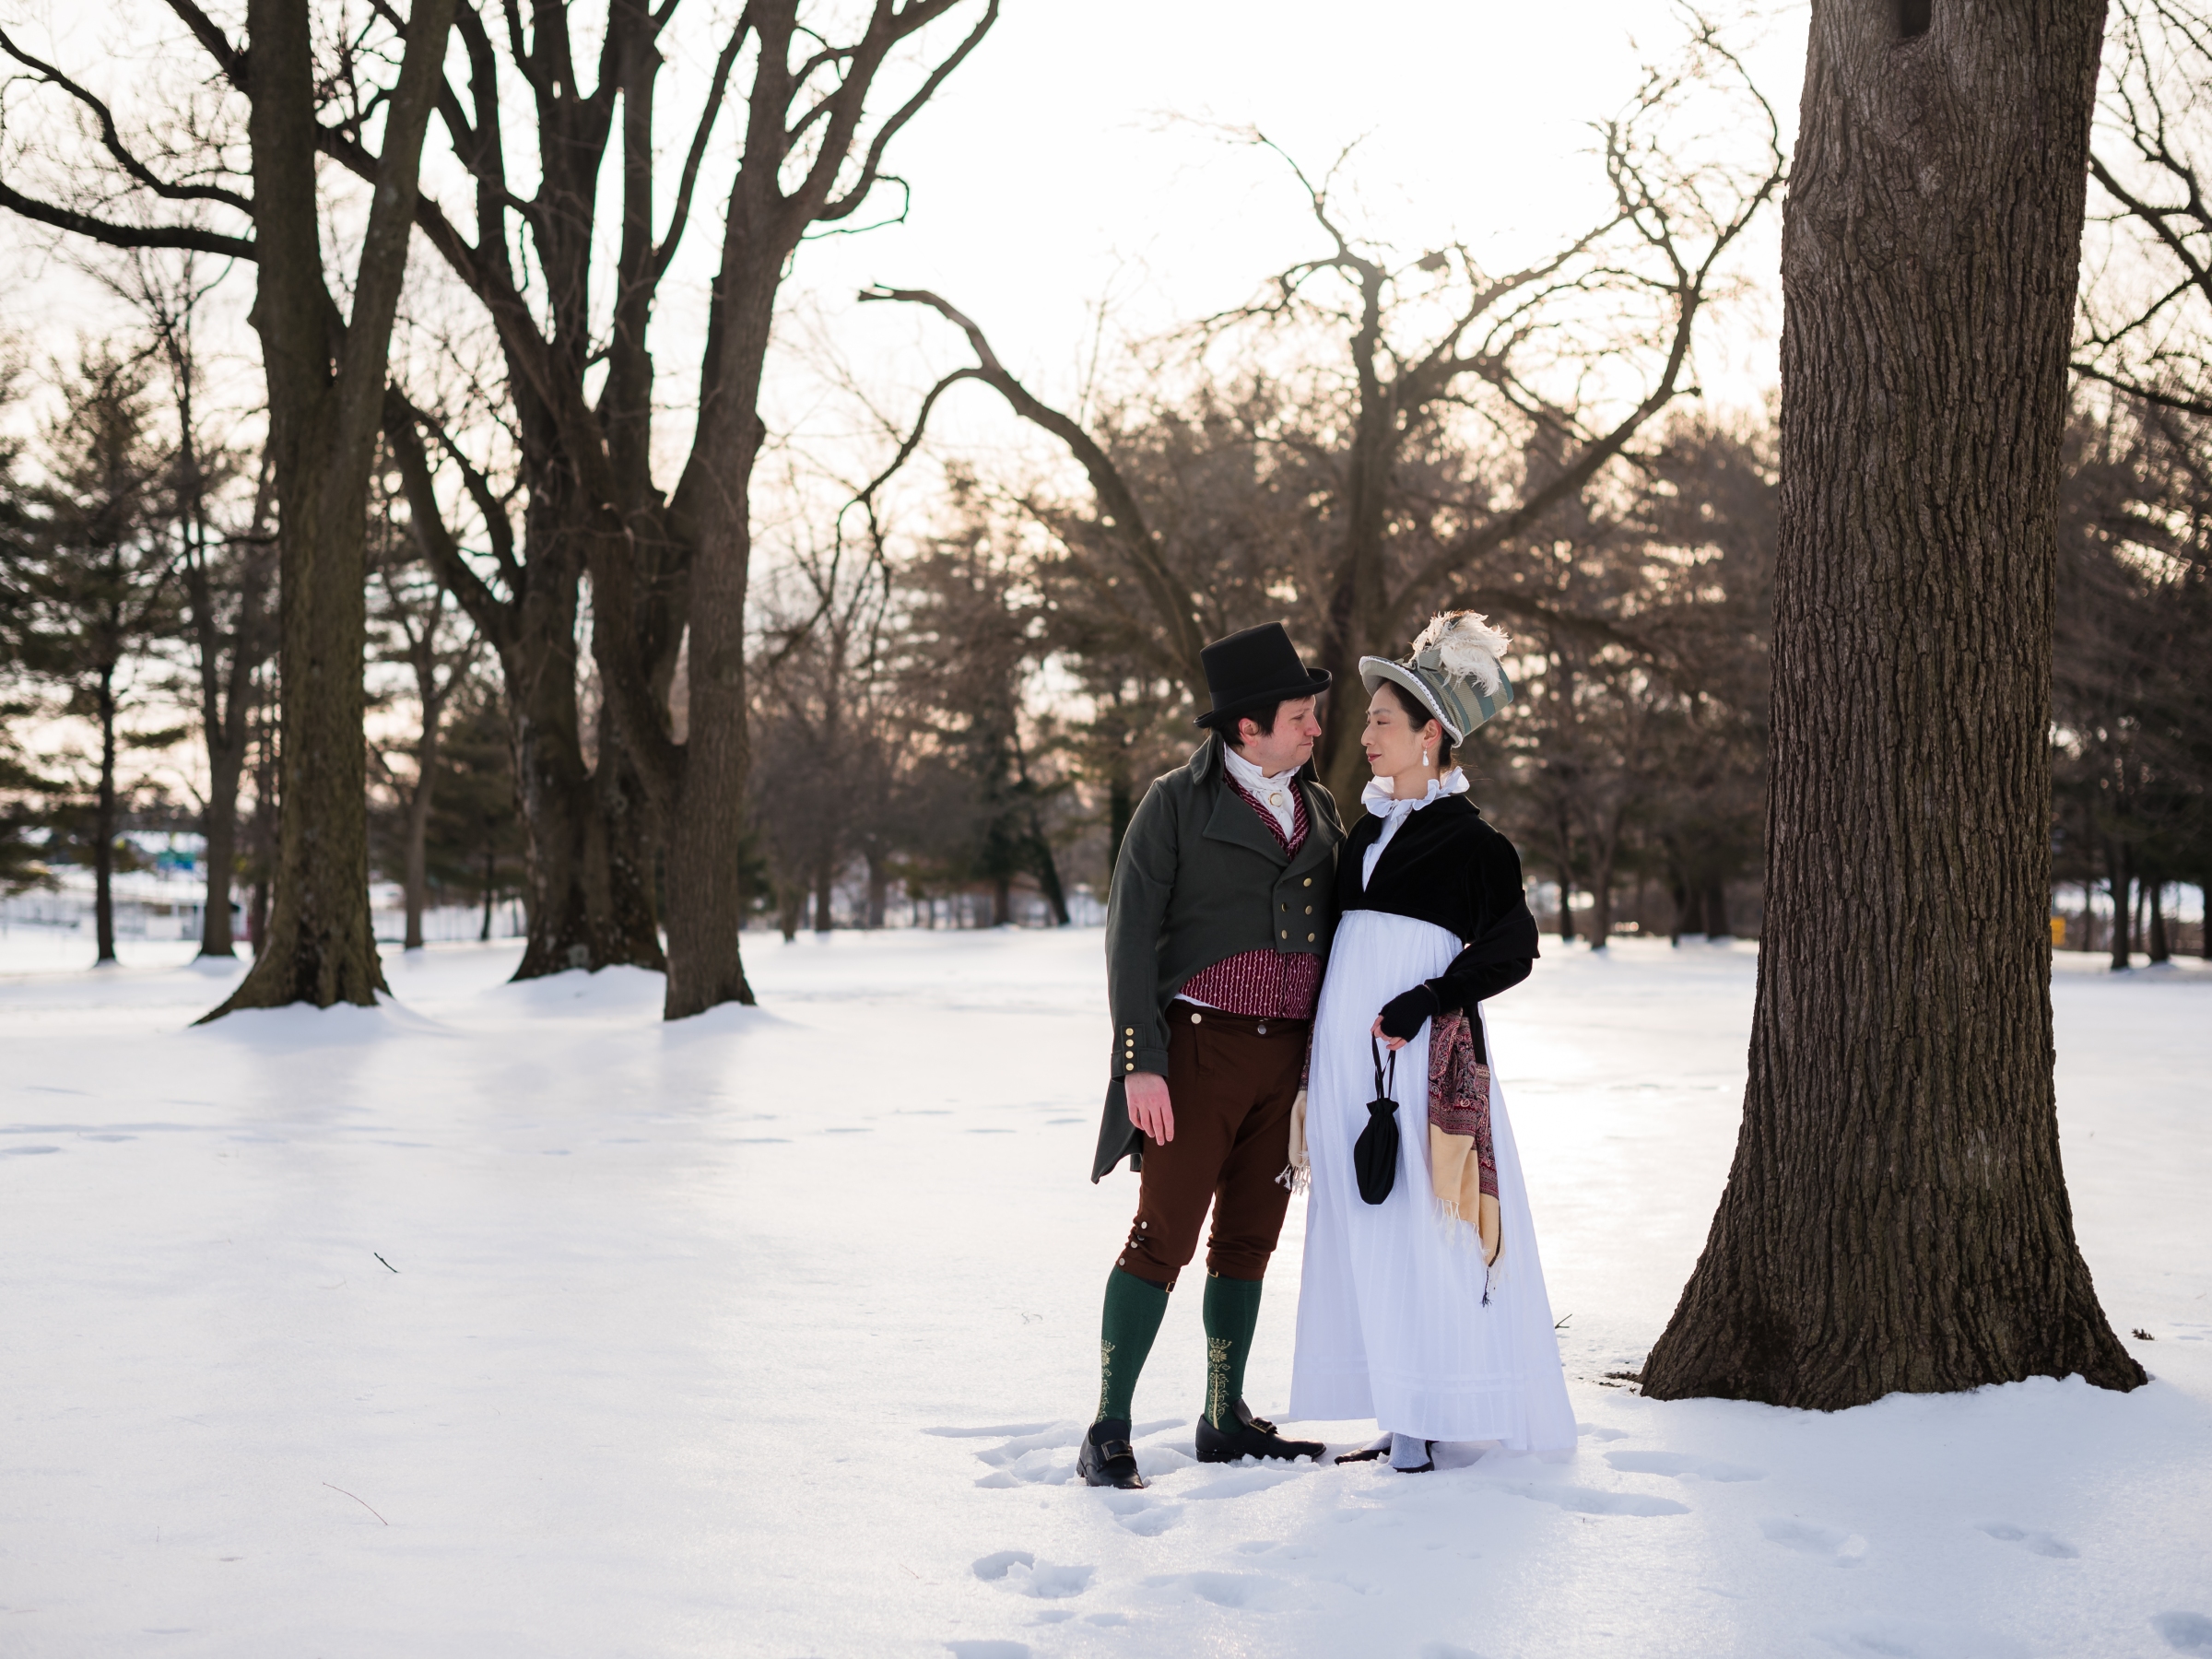 A historical costuming couple poses together on a snowy afternoon at Rose Hill Manor Park in Frederick, Maryland